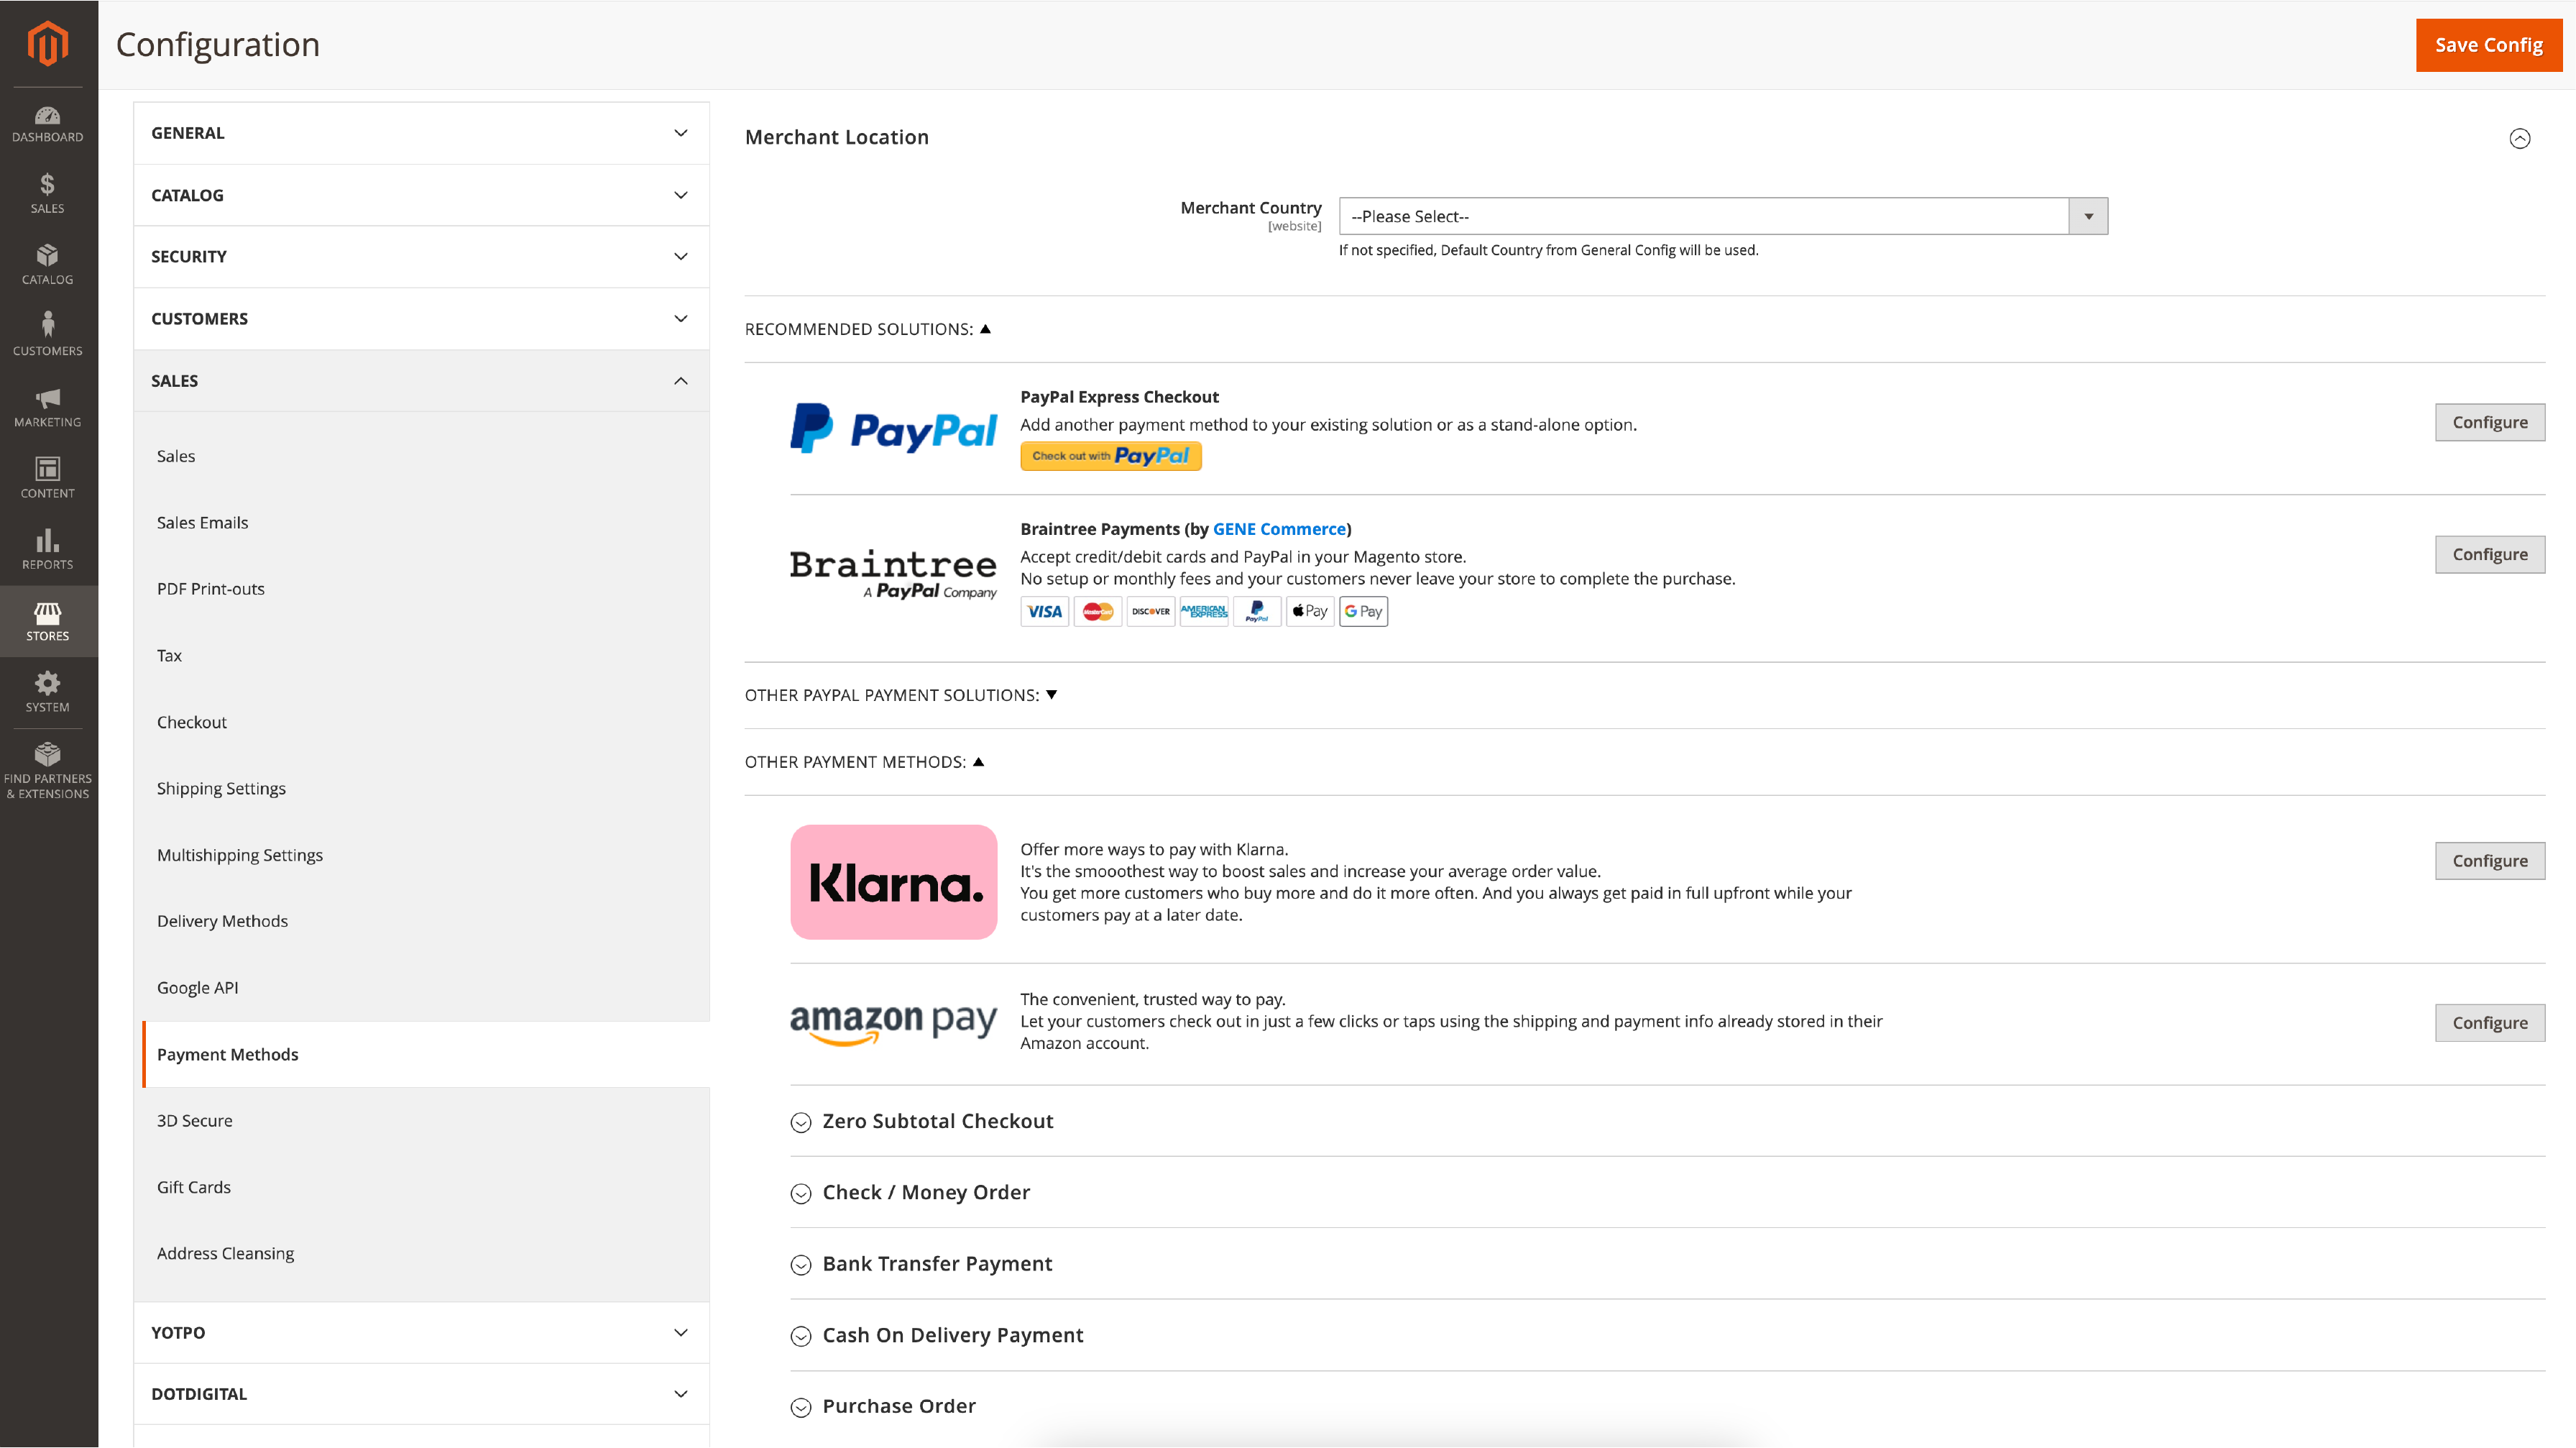 Integrating Payment Gateways in Magento 2